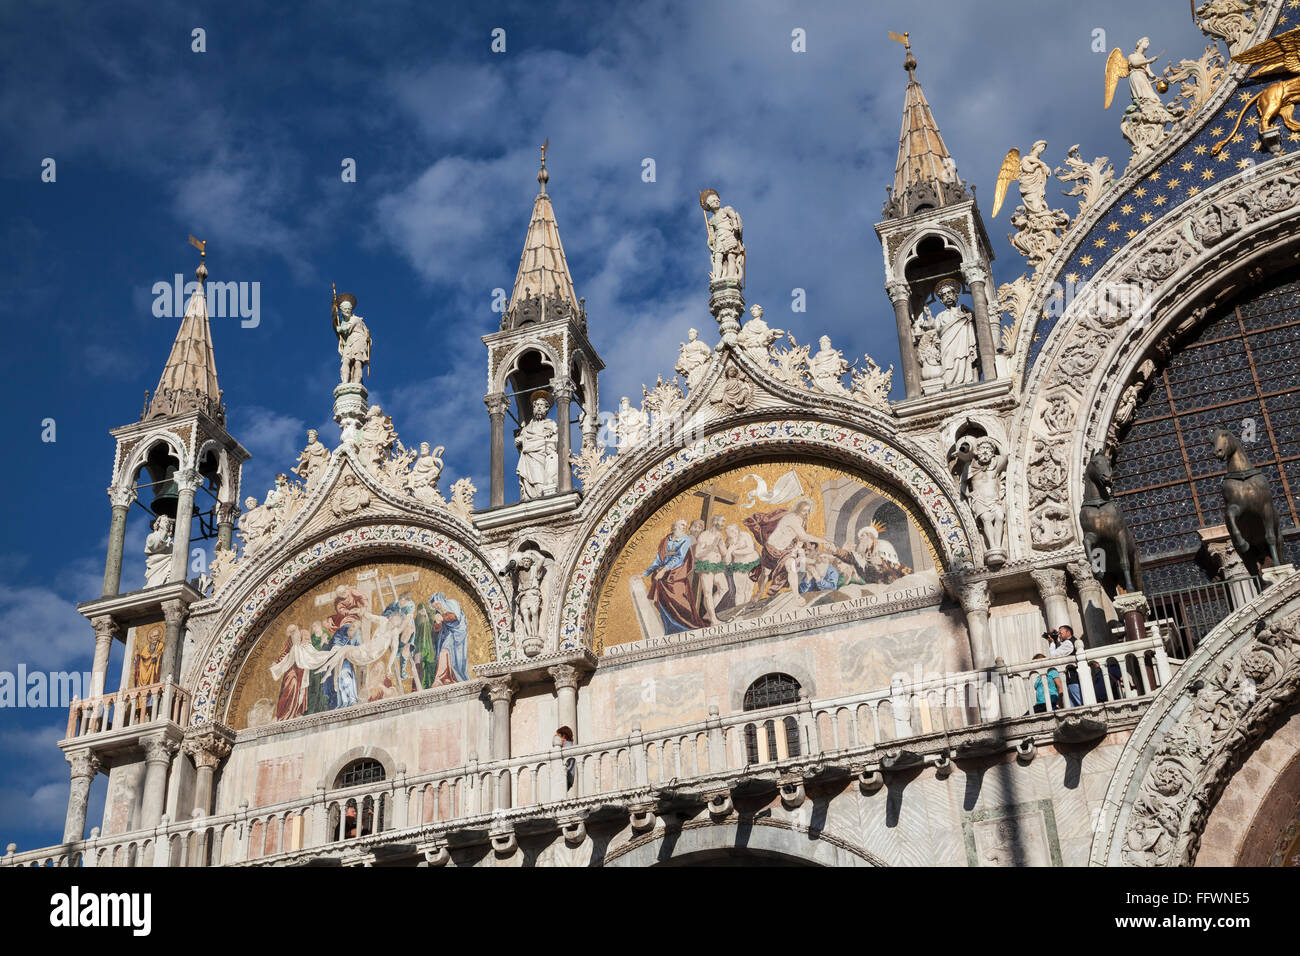 Sunlit view of the detailed upper edifice of St Marks Basilica in Venice, against a blue sky Stock Photo